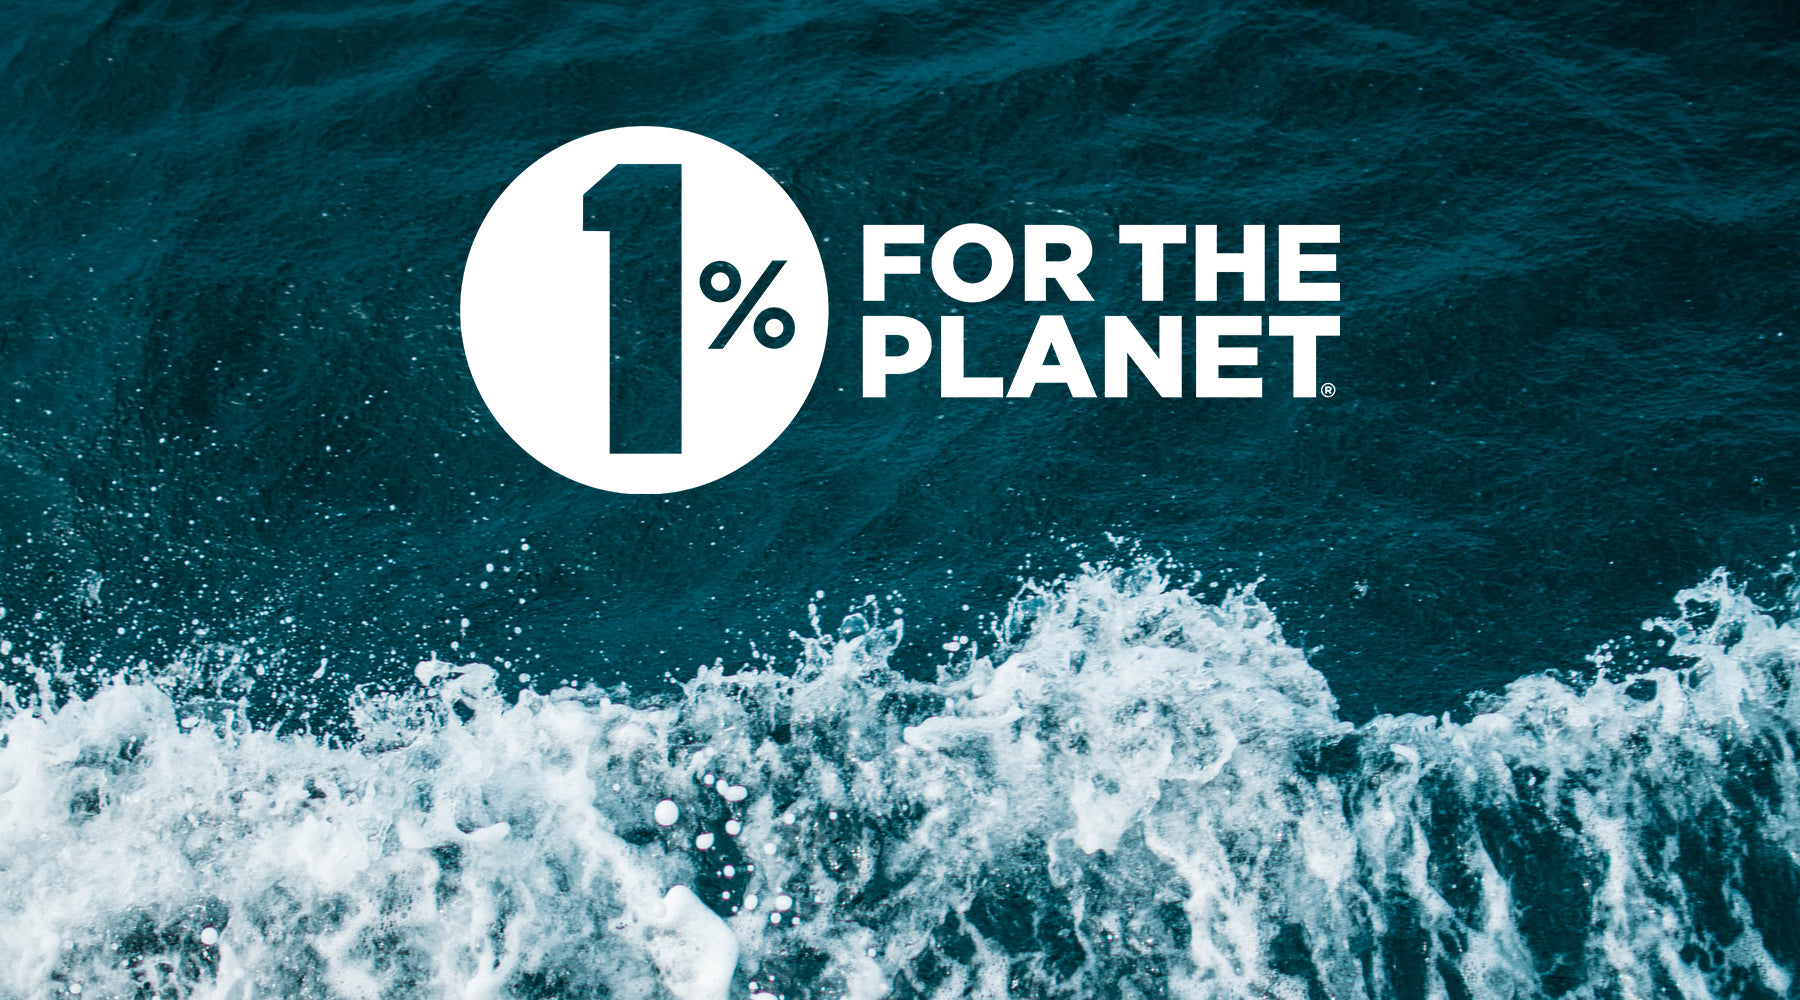 Nummy's Partnership with 1% for the Planet